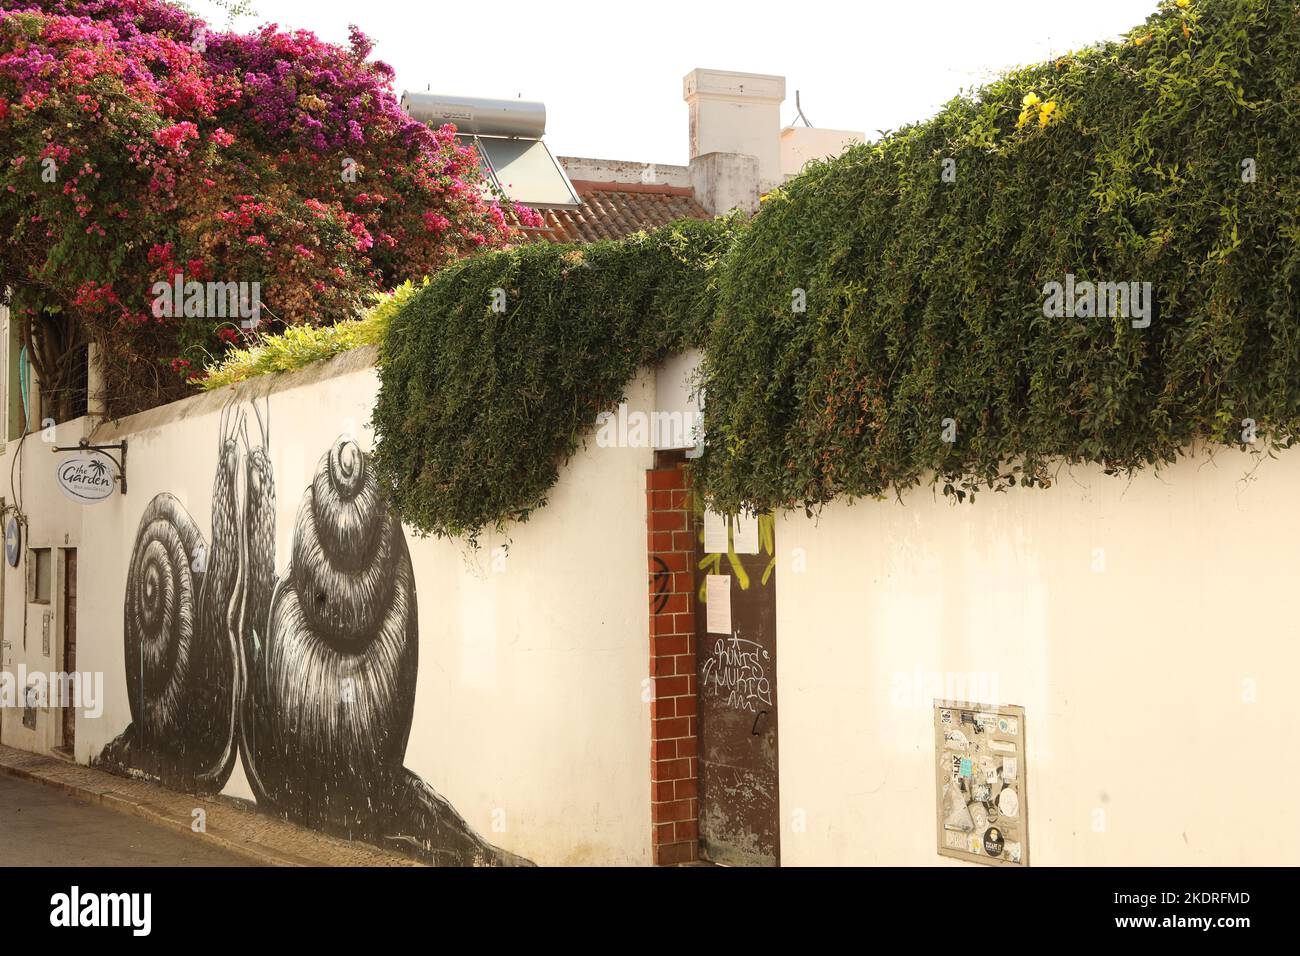 A mural of two snails on a wall in old town, Lagos, Algarve, Portugal Stock Photo